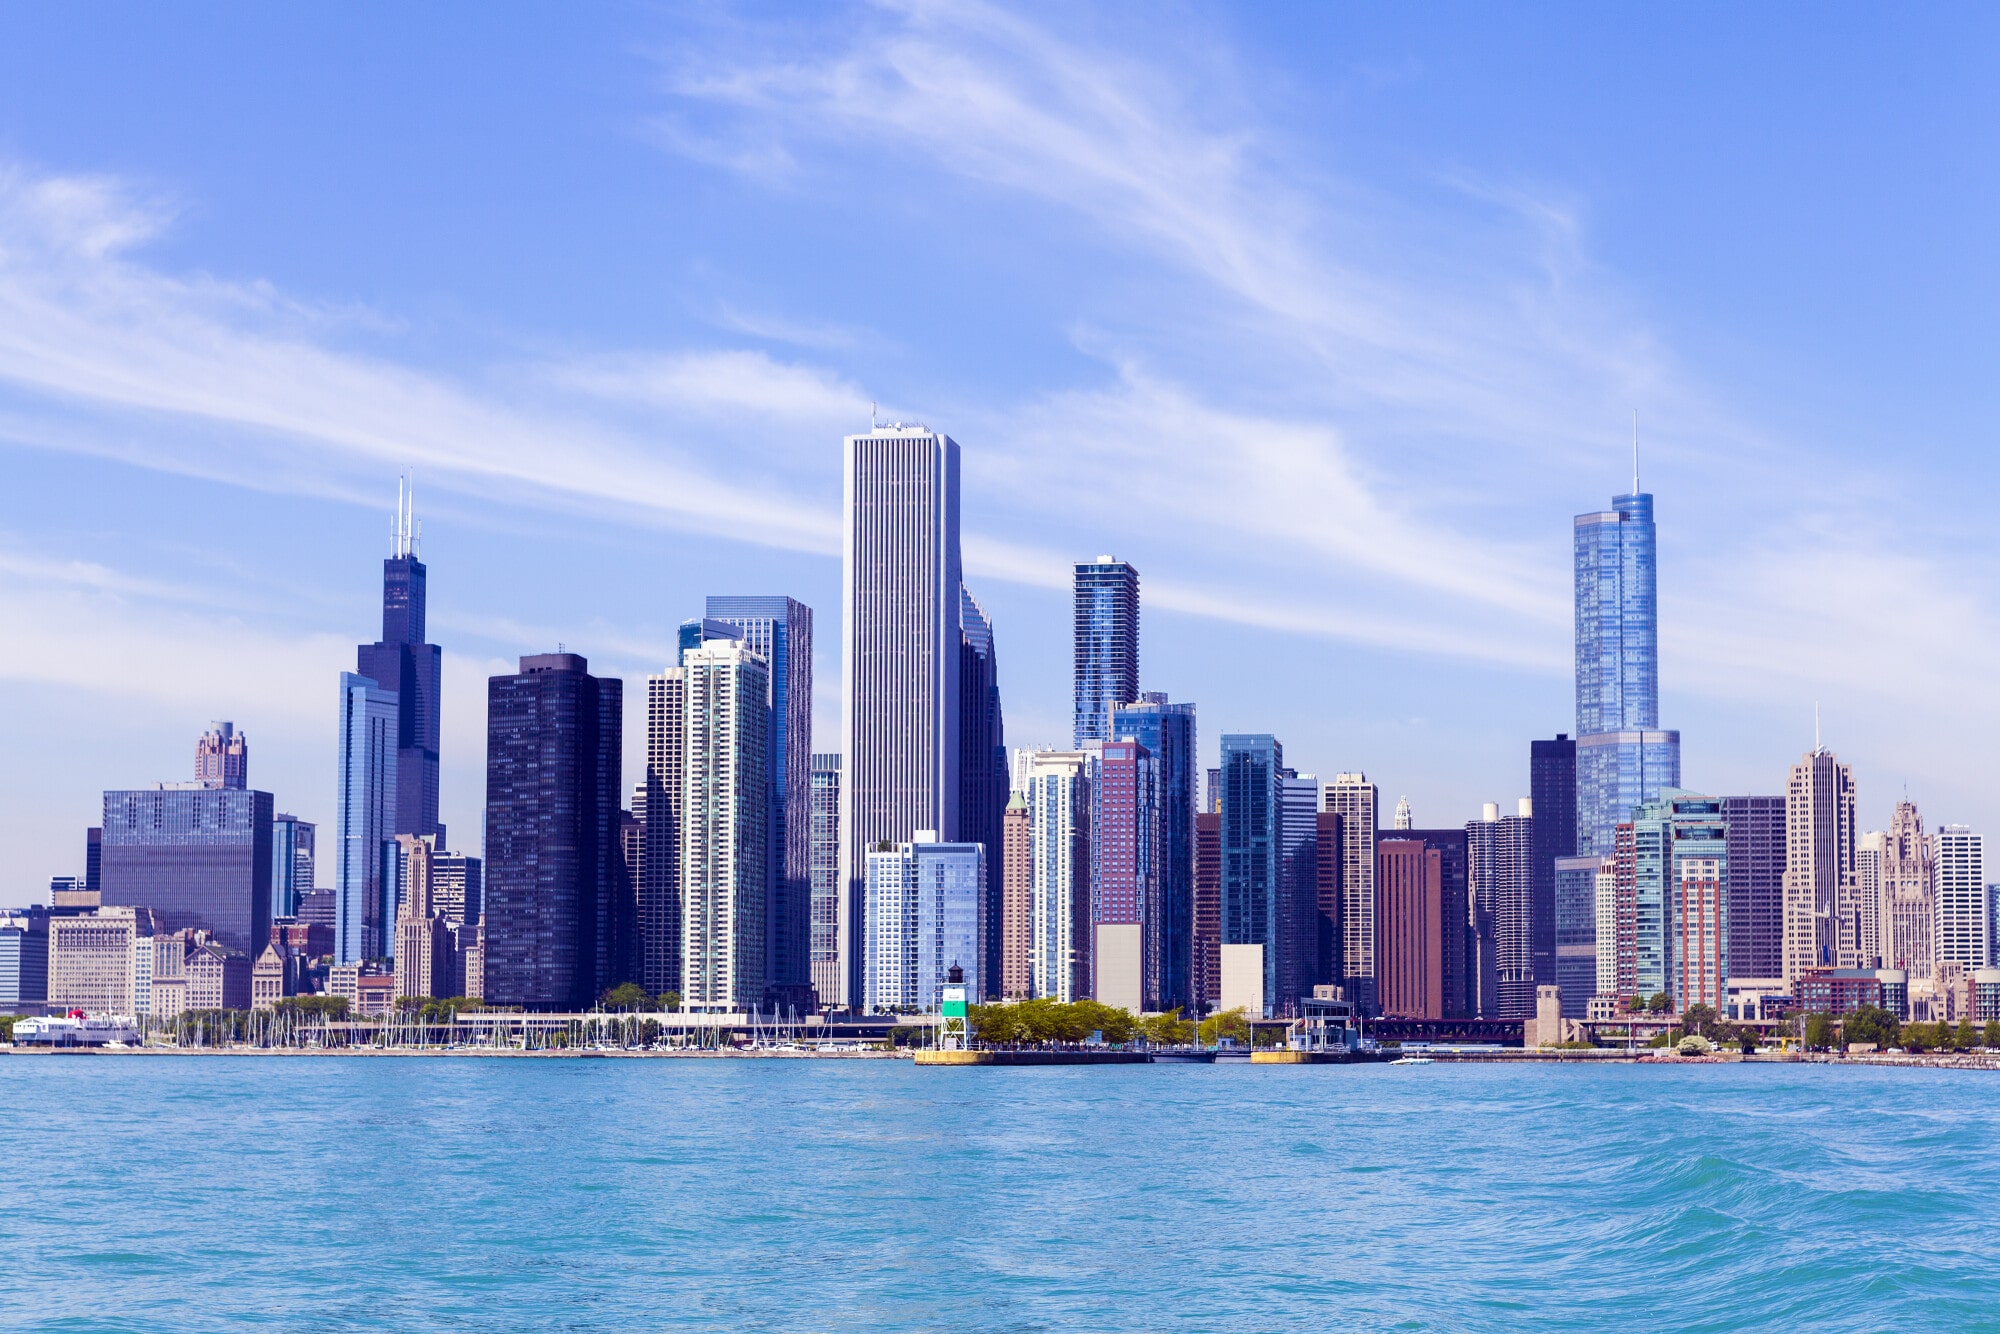 Why Should I Look into Hiring a Property Manager in Chicago?